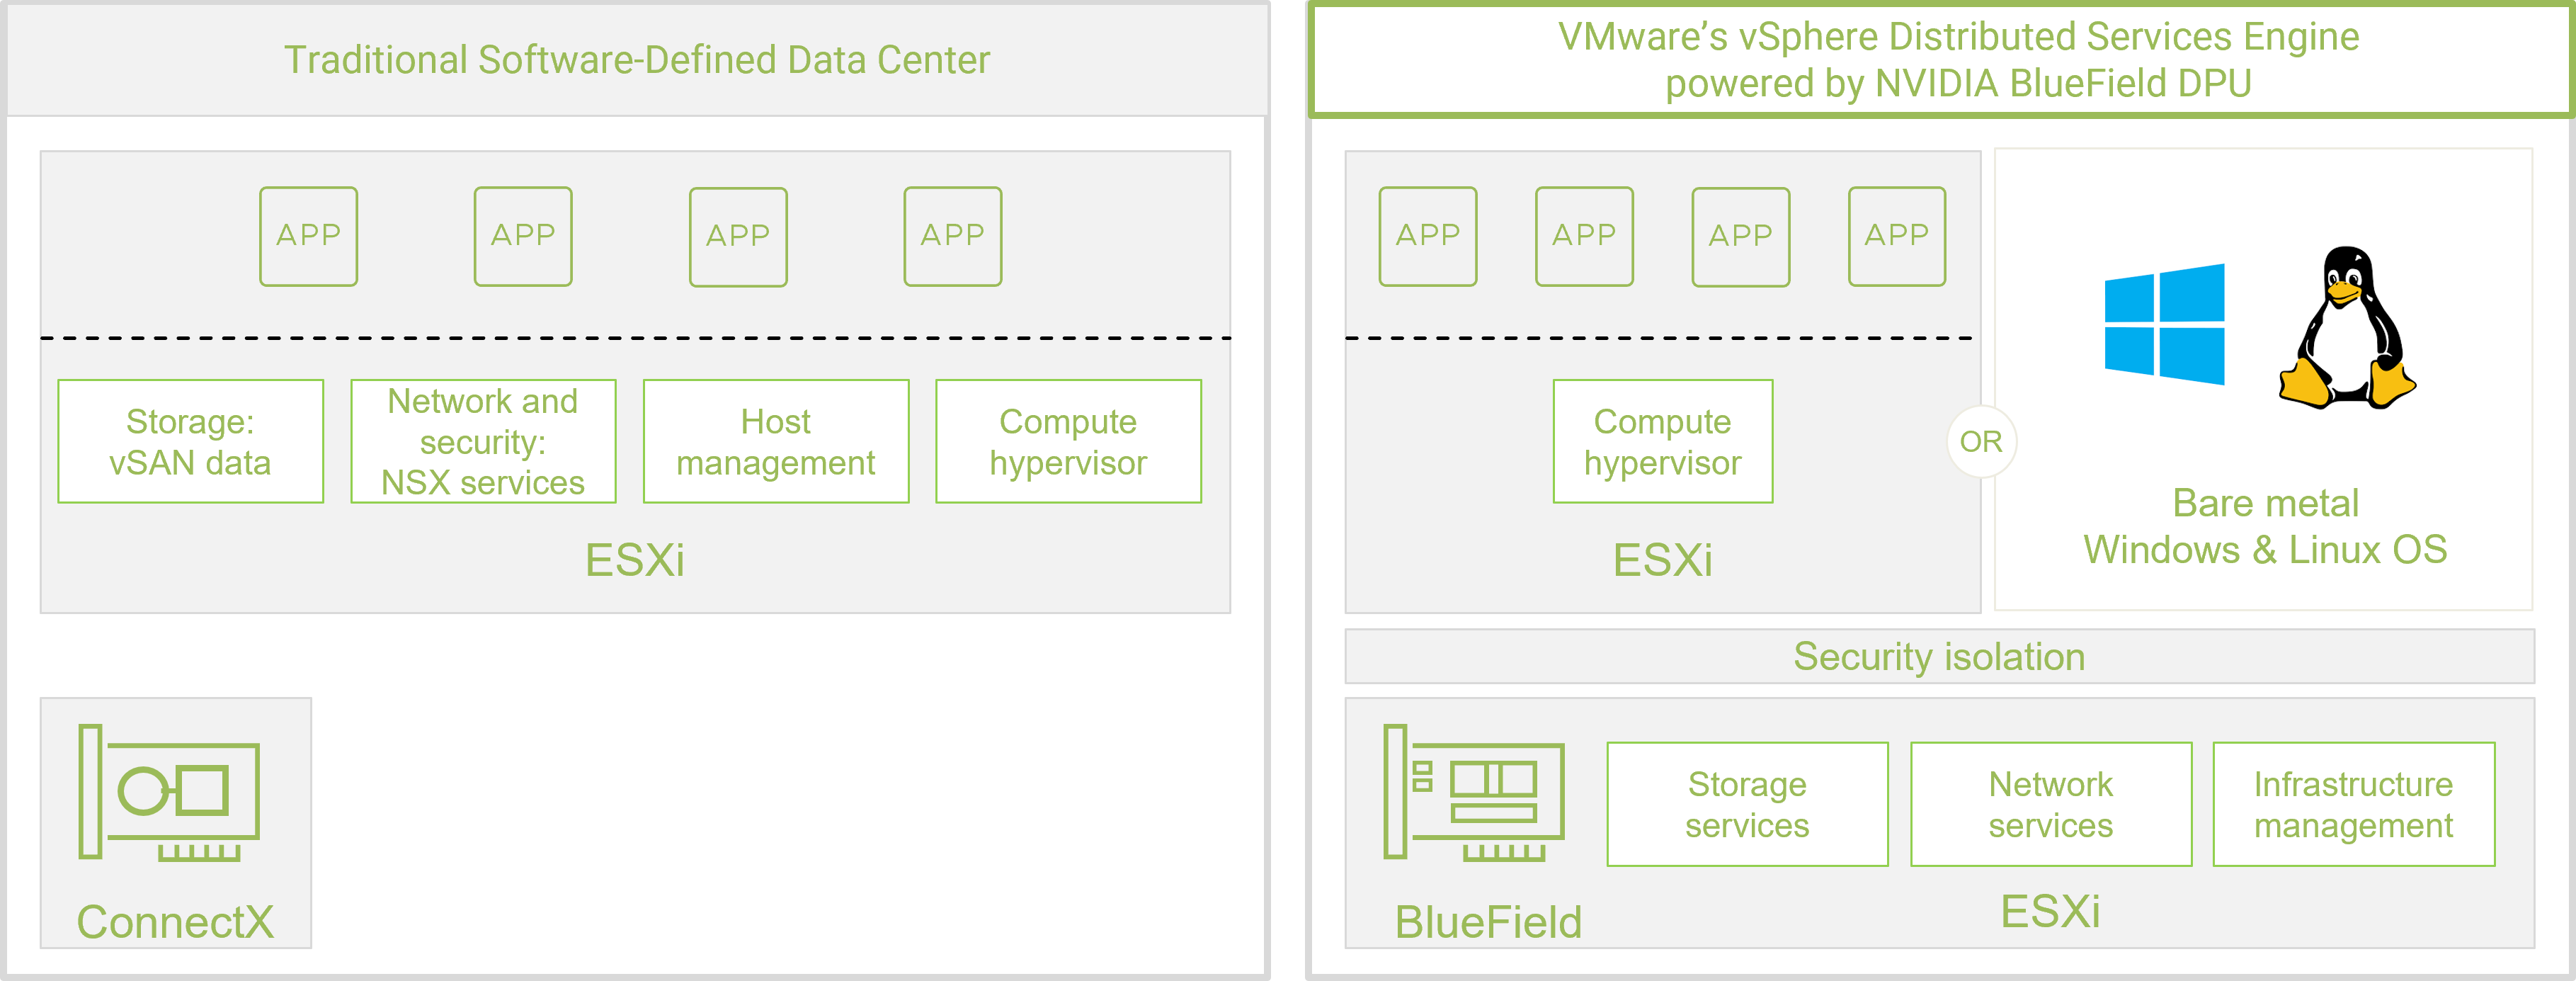 VMware’s vSphere Distributed Services Engine architectural changes, re-architecting VMware’s ESXi for Multi-Cloud Environments.